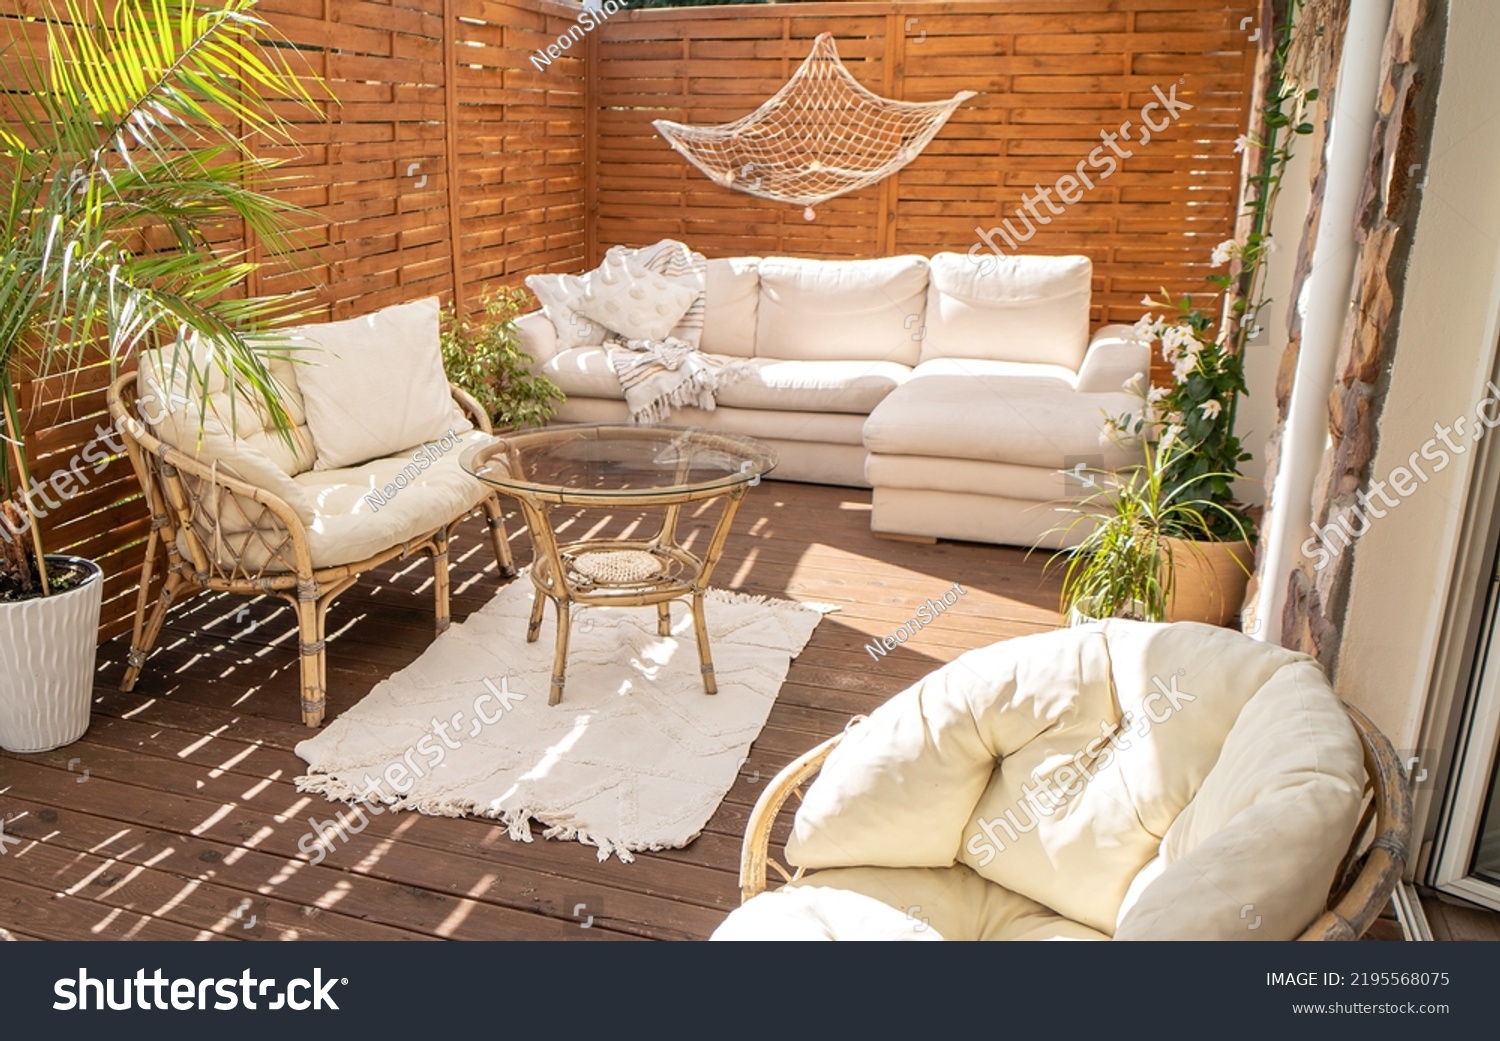 Real photo of relaxing boho zone in home. Wooden floor on terrace with comfy furniture and green plants. Decoration concept. Sunny summer day.
 #2195568075